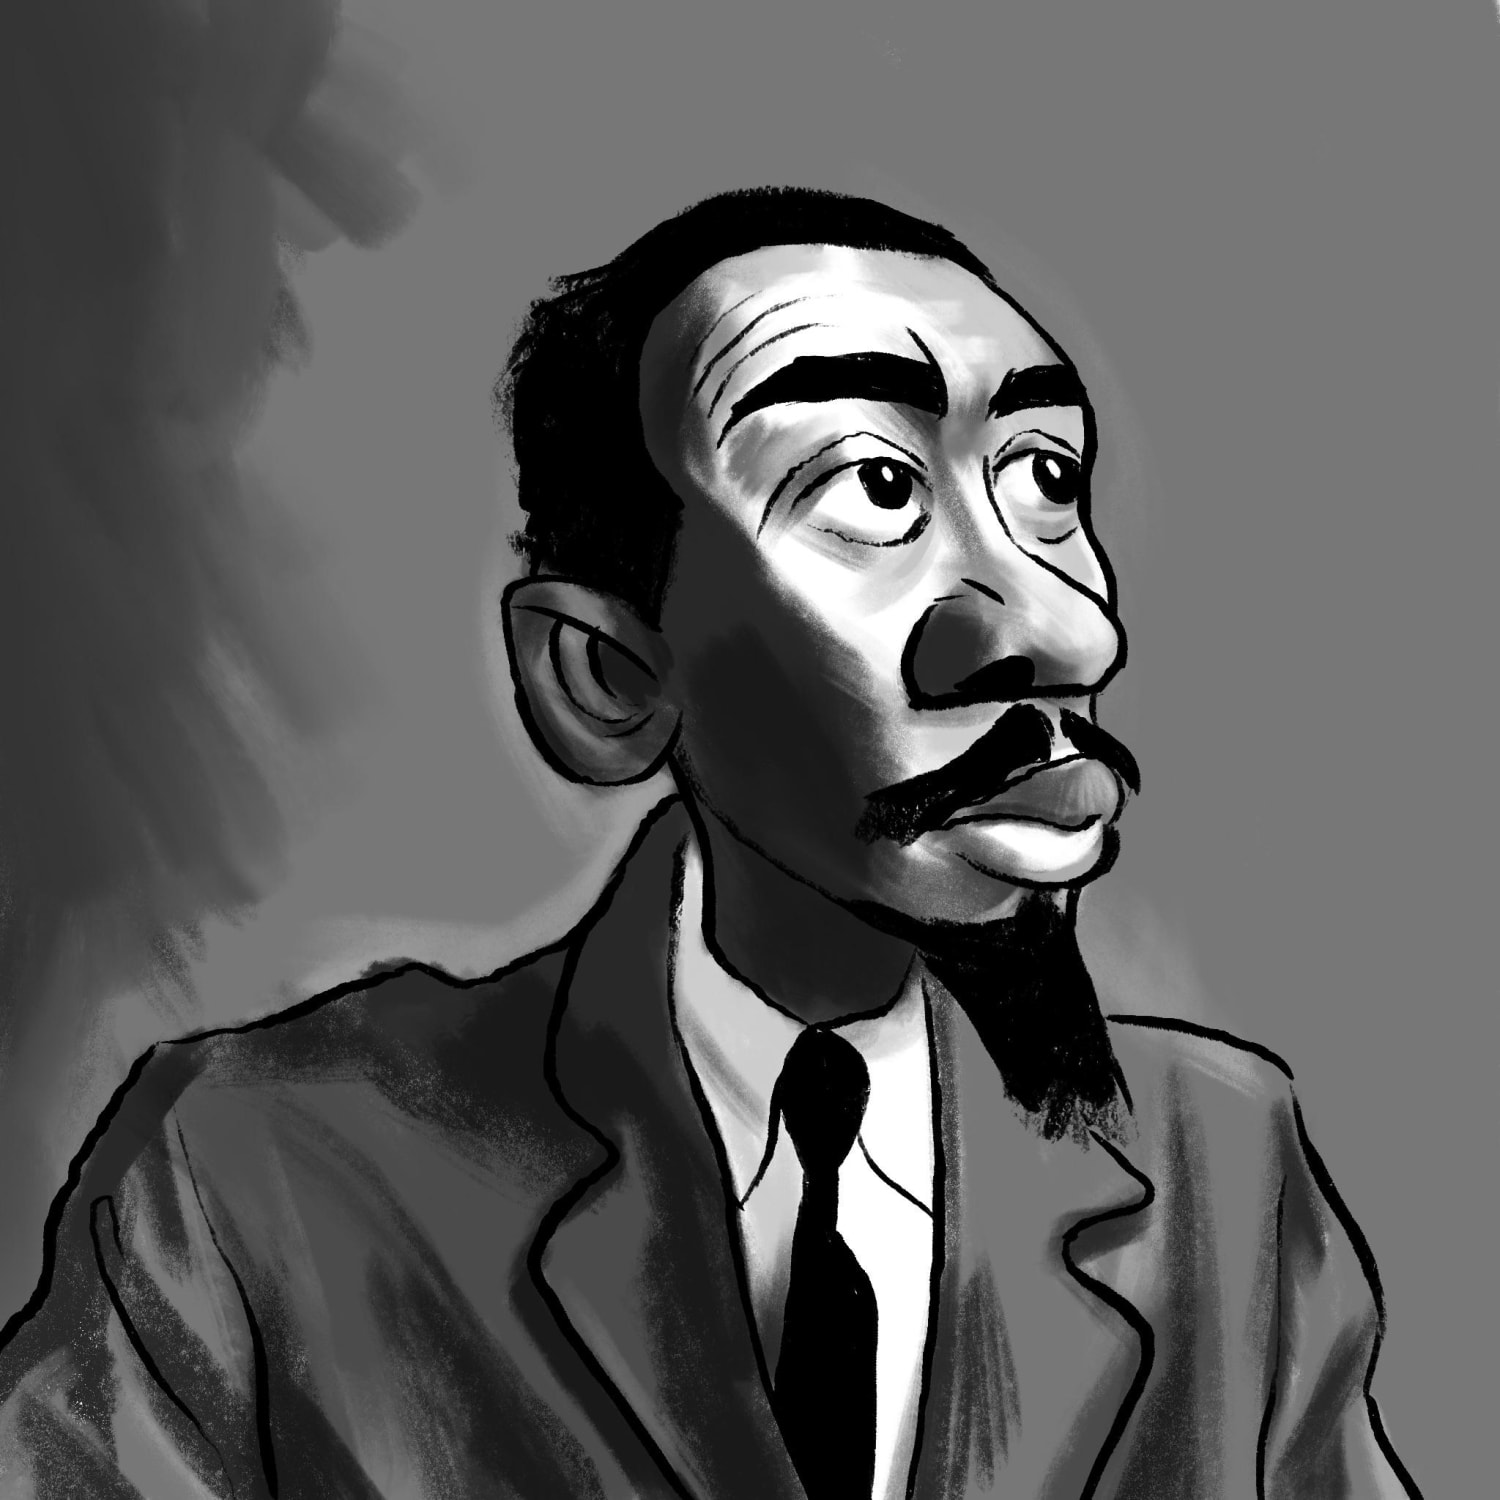 My recent portrait of Eric Dolphy